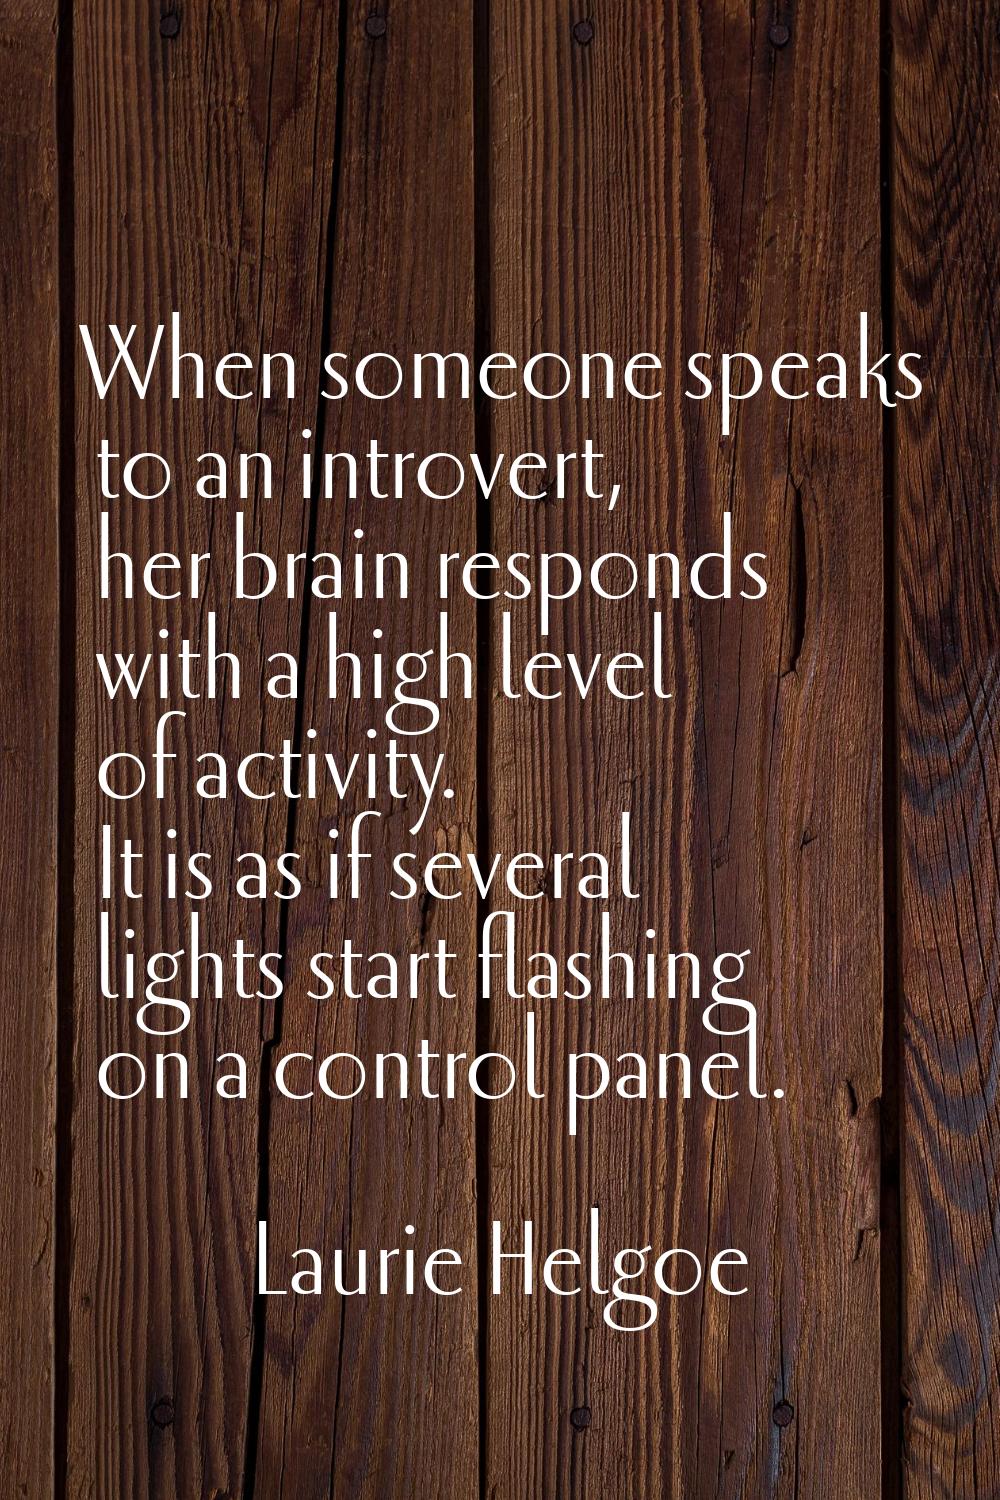 When someone speaks to an introvert, her brain responds with a high level of activity. It is as if 